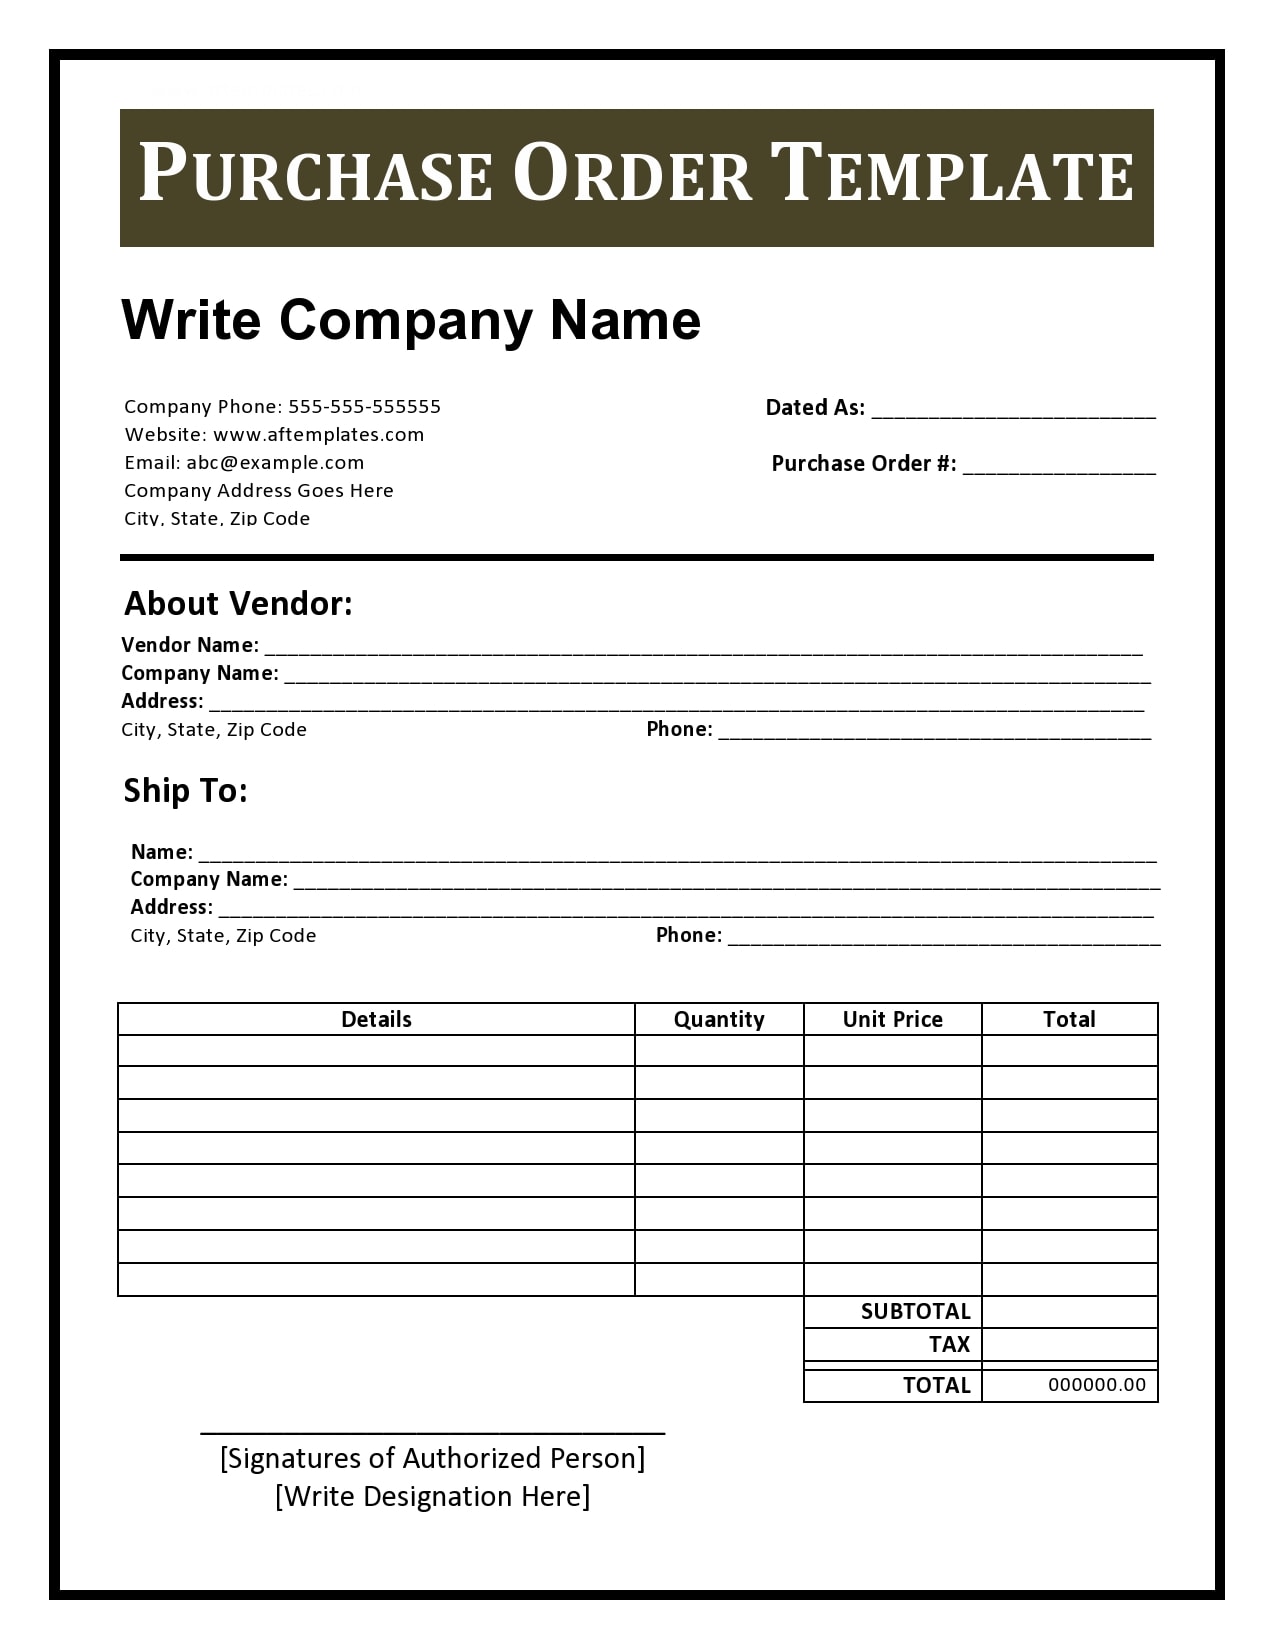 30 Free Purchase Order Templates (Excel & Doc) TemplateArchive